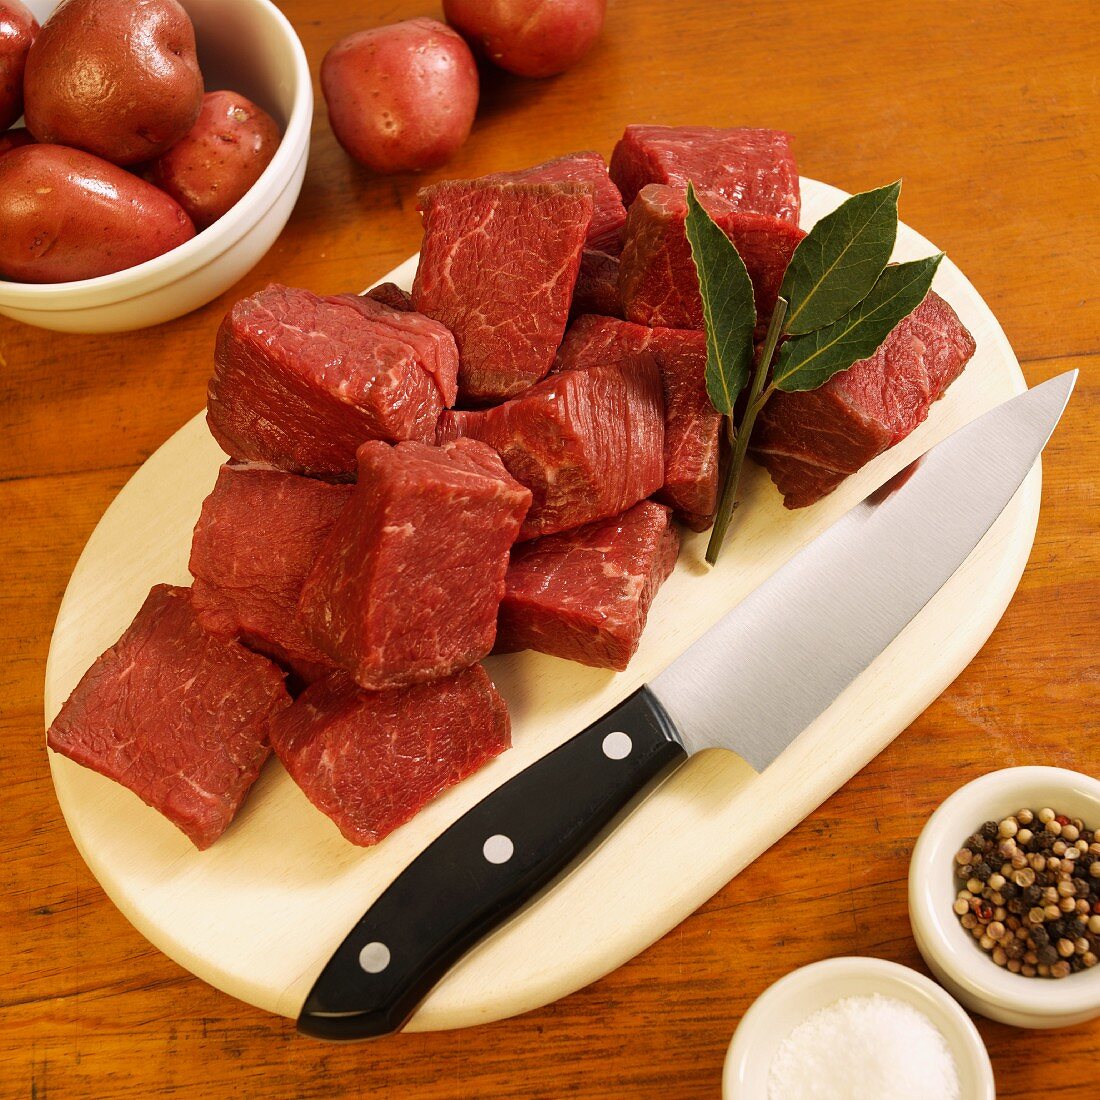 Cubed Grass Fed Beef Sirloin Tips on Cutting Board; Peppercorns, Salt and Red Potatoes